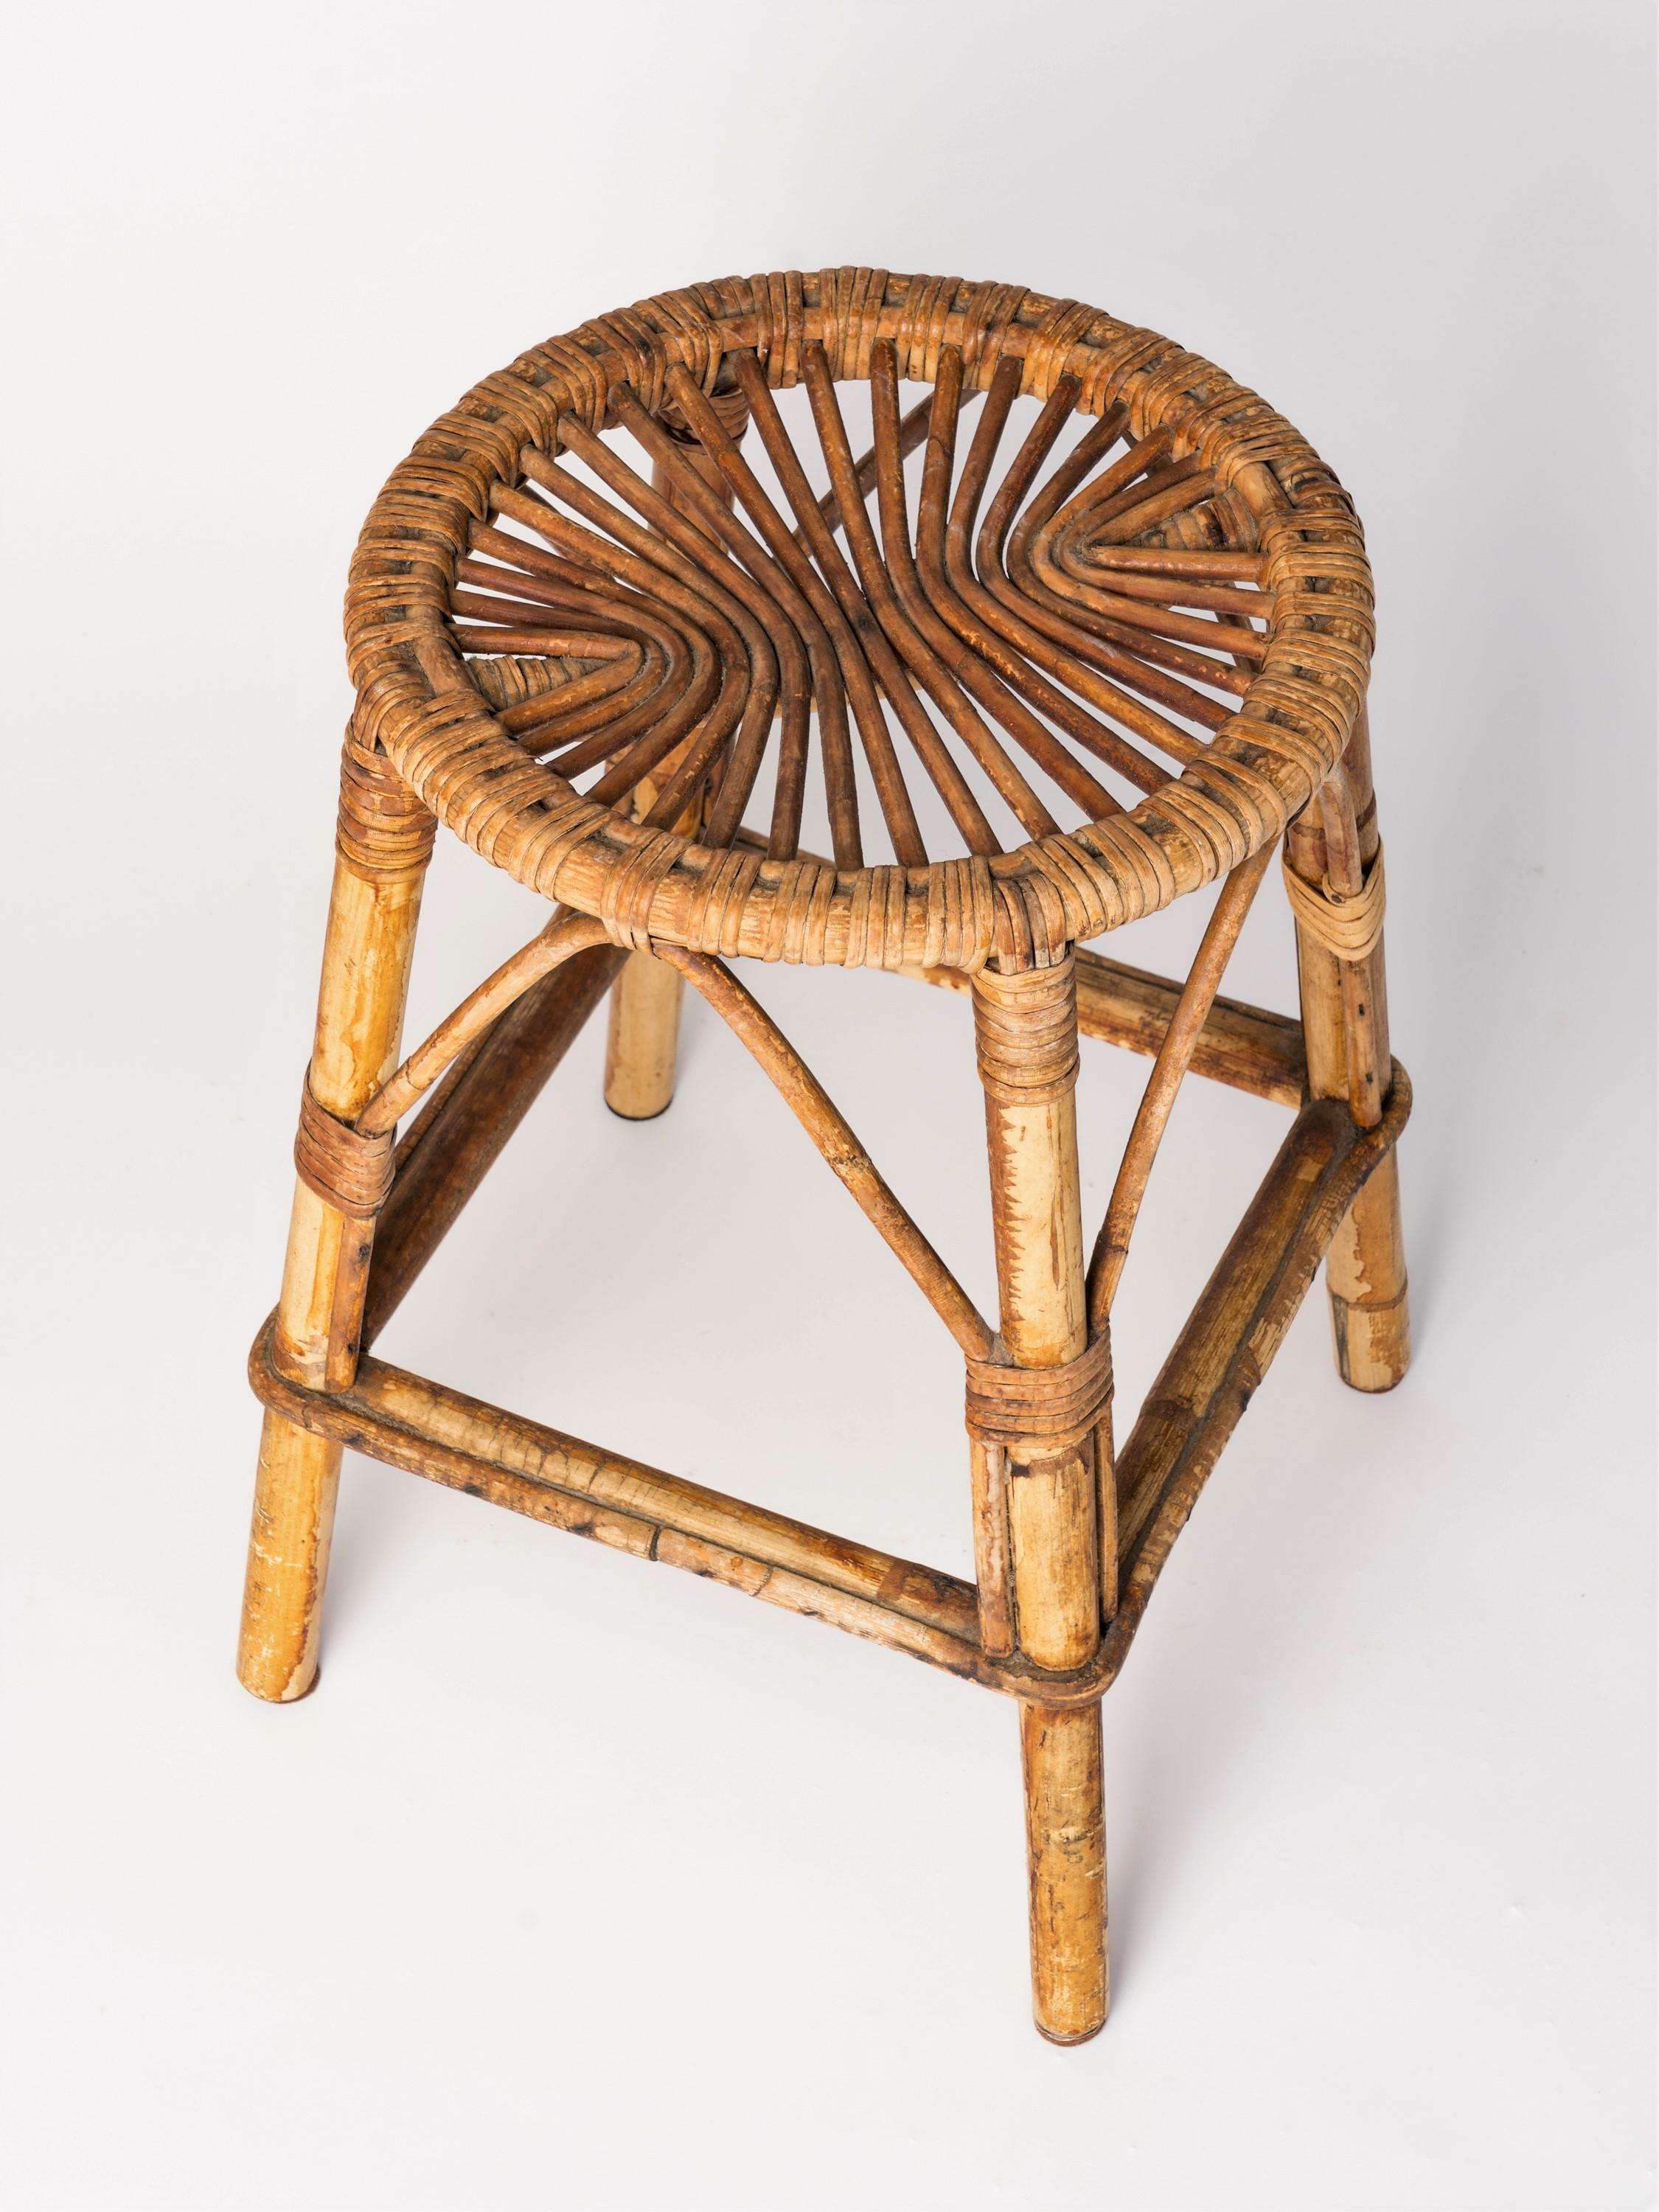 French Modernist Rattan Stool, France, 1960's For Sale